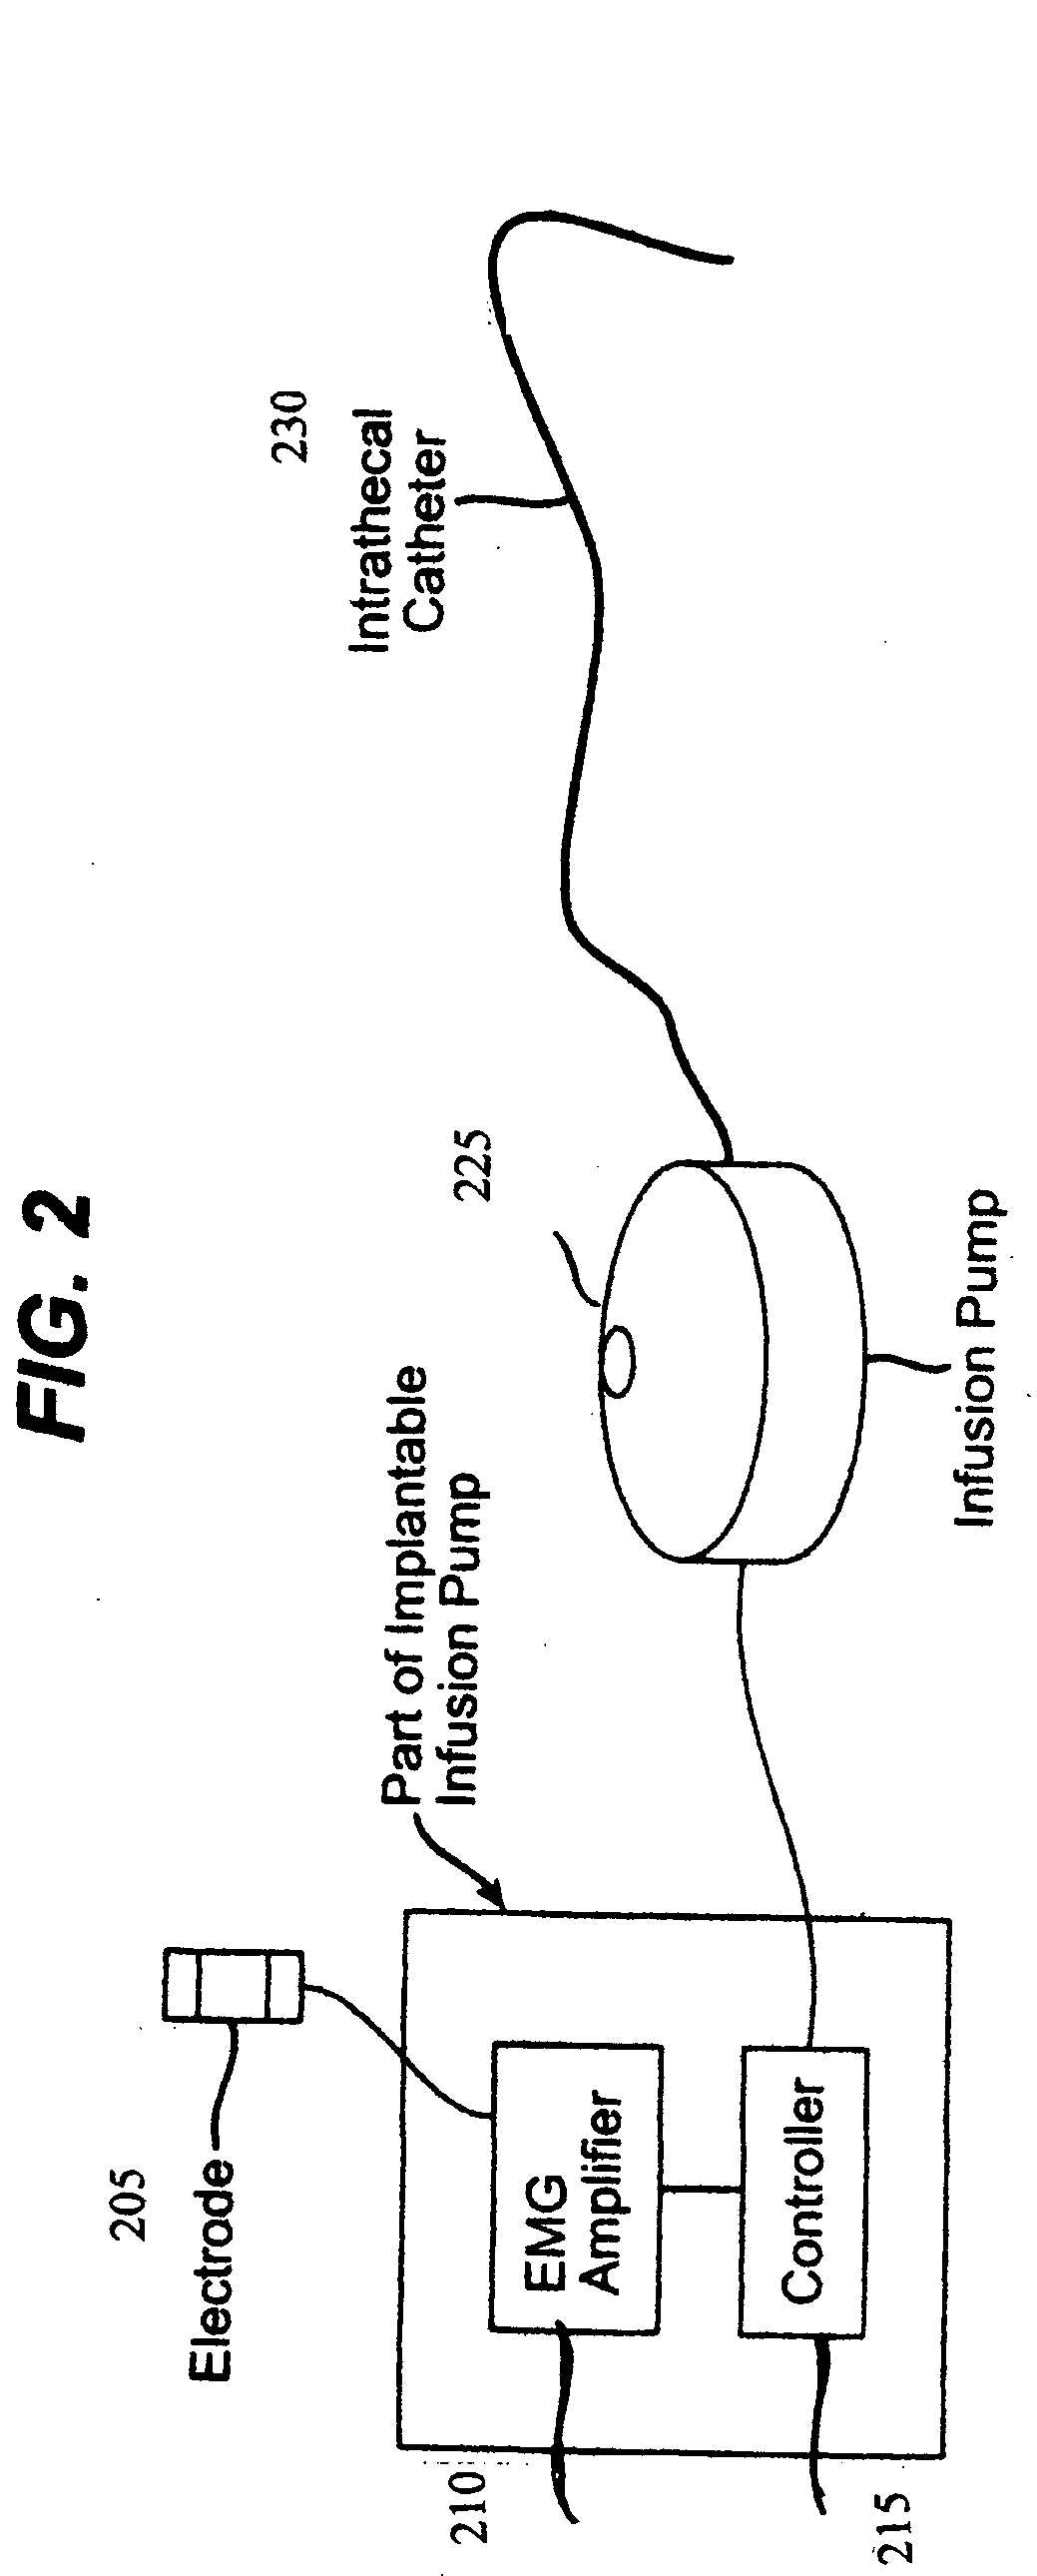 Closed loop system and method for controlling muscle activity via an intrathecal catheter